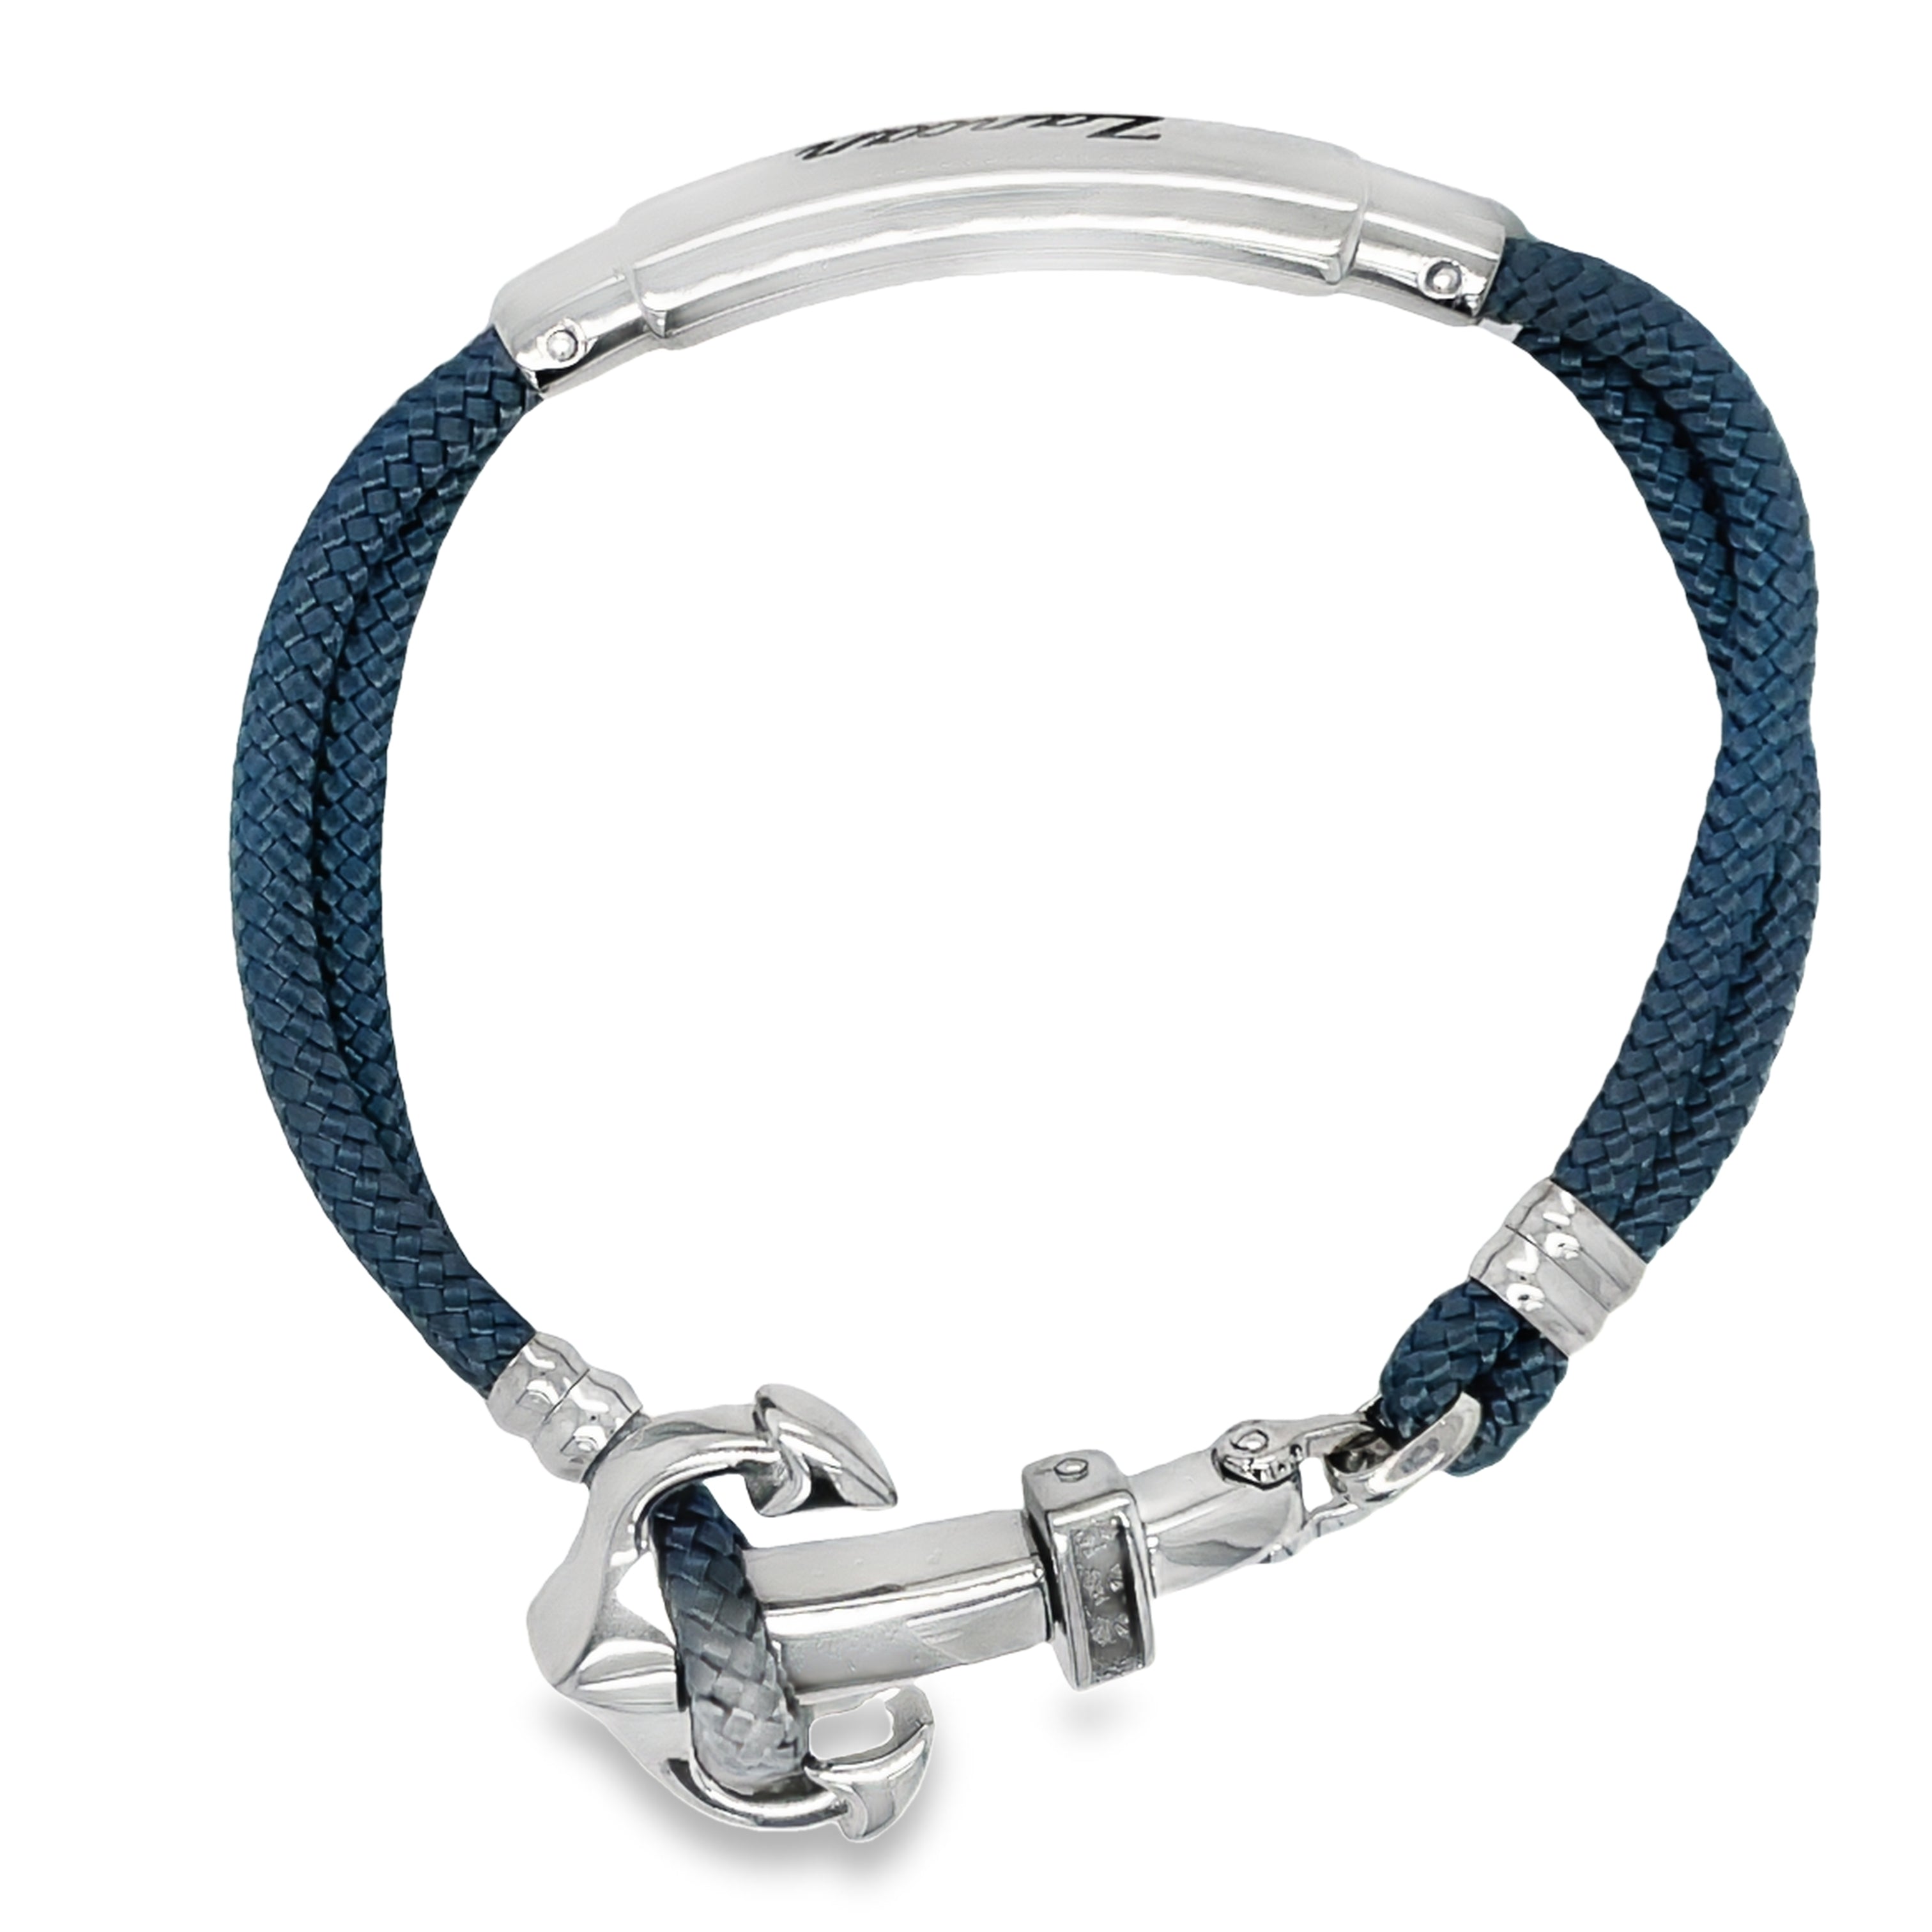 Upgrade your style with the Zancan Sterling Silver Anchor Light Blue Cord Bracelet. Made in Italy, this bracelet boasts a sleek sterling silver design coated with rhodium for added shine. The teal cord color adds a unique touch, while the adjustable slide lock ensures a perfect fit. Elevate your look today.